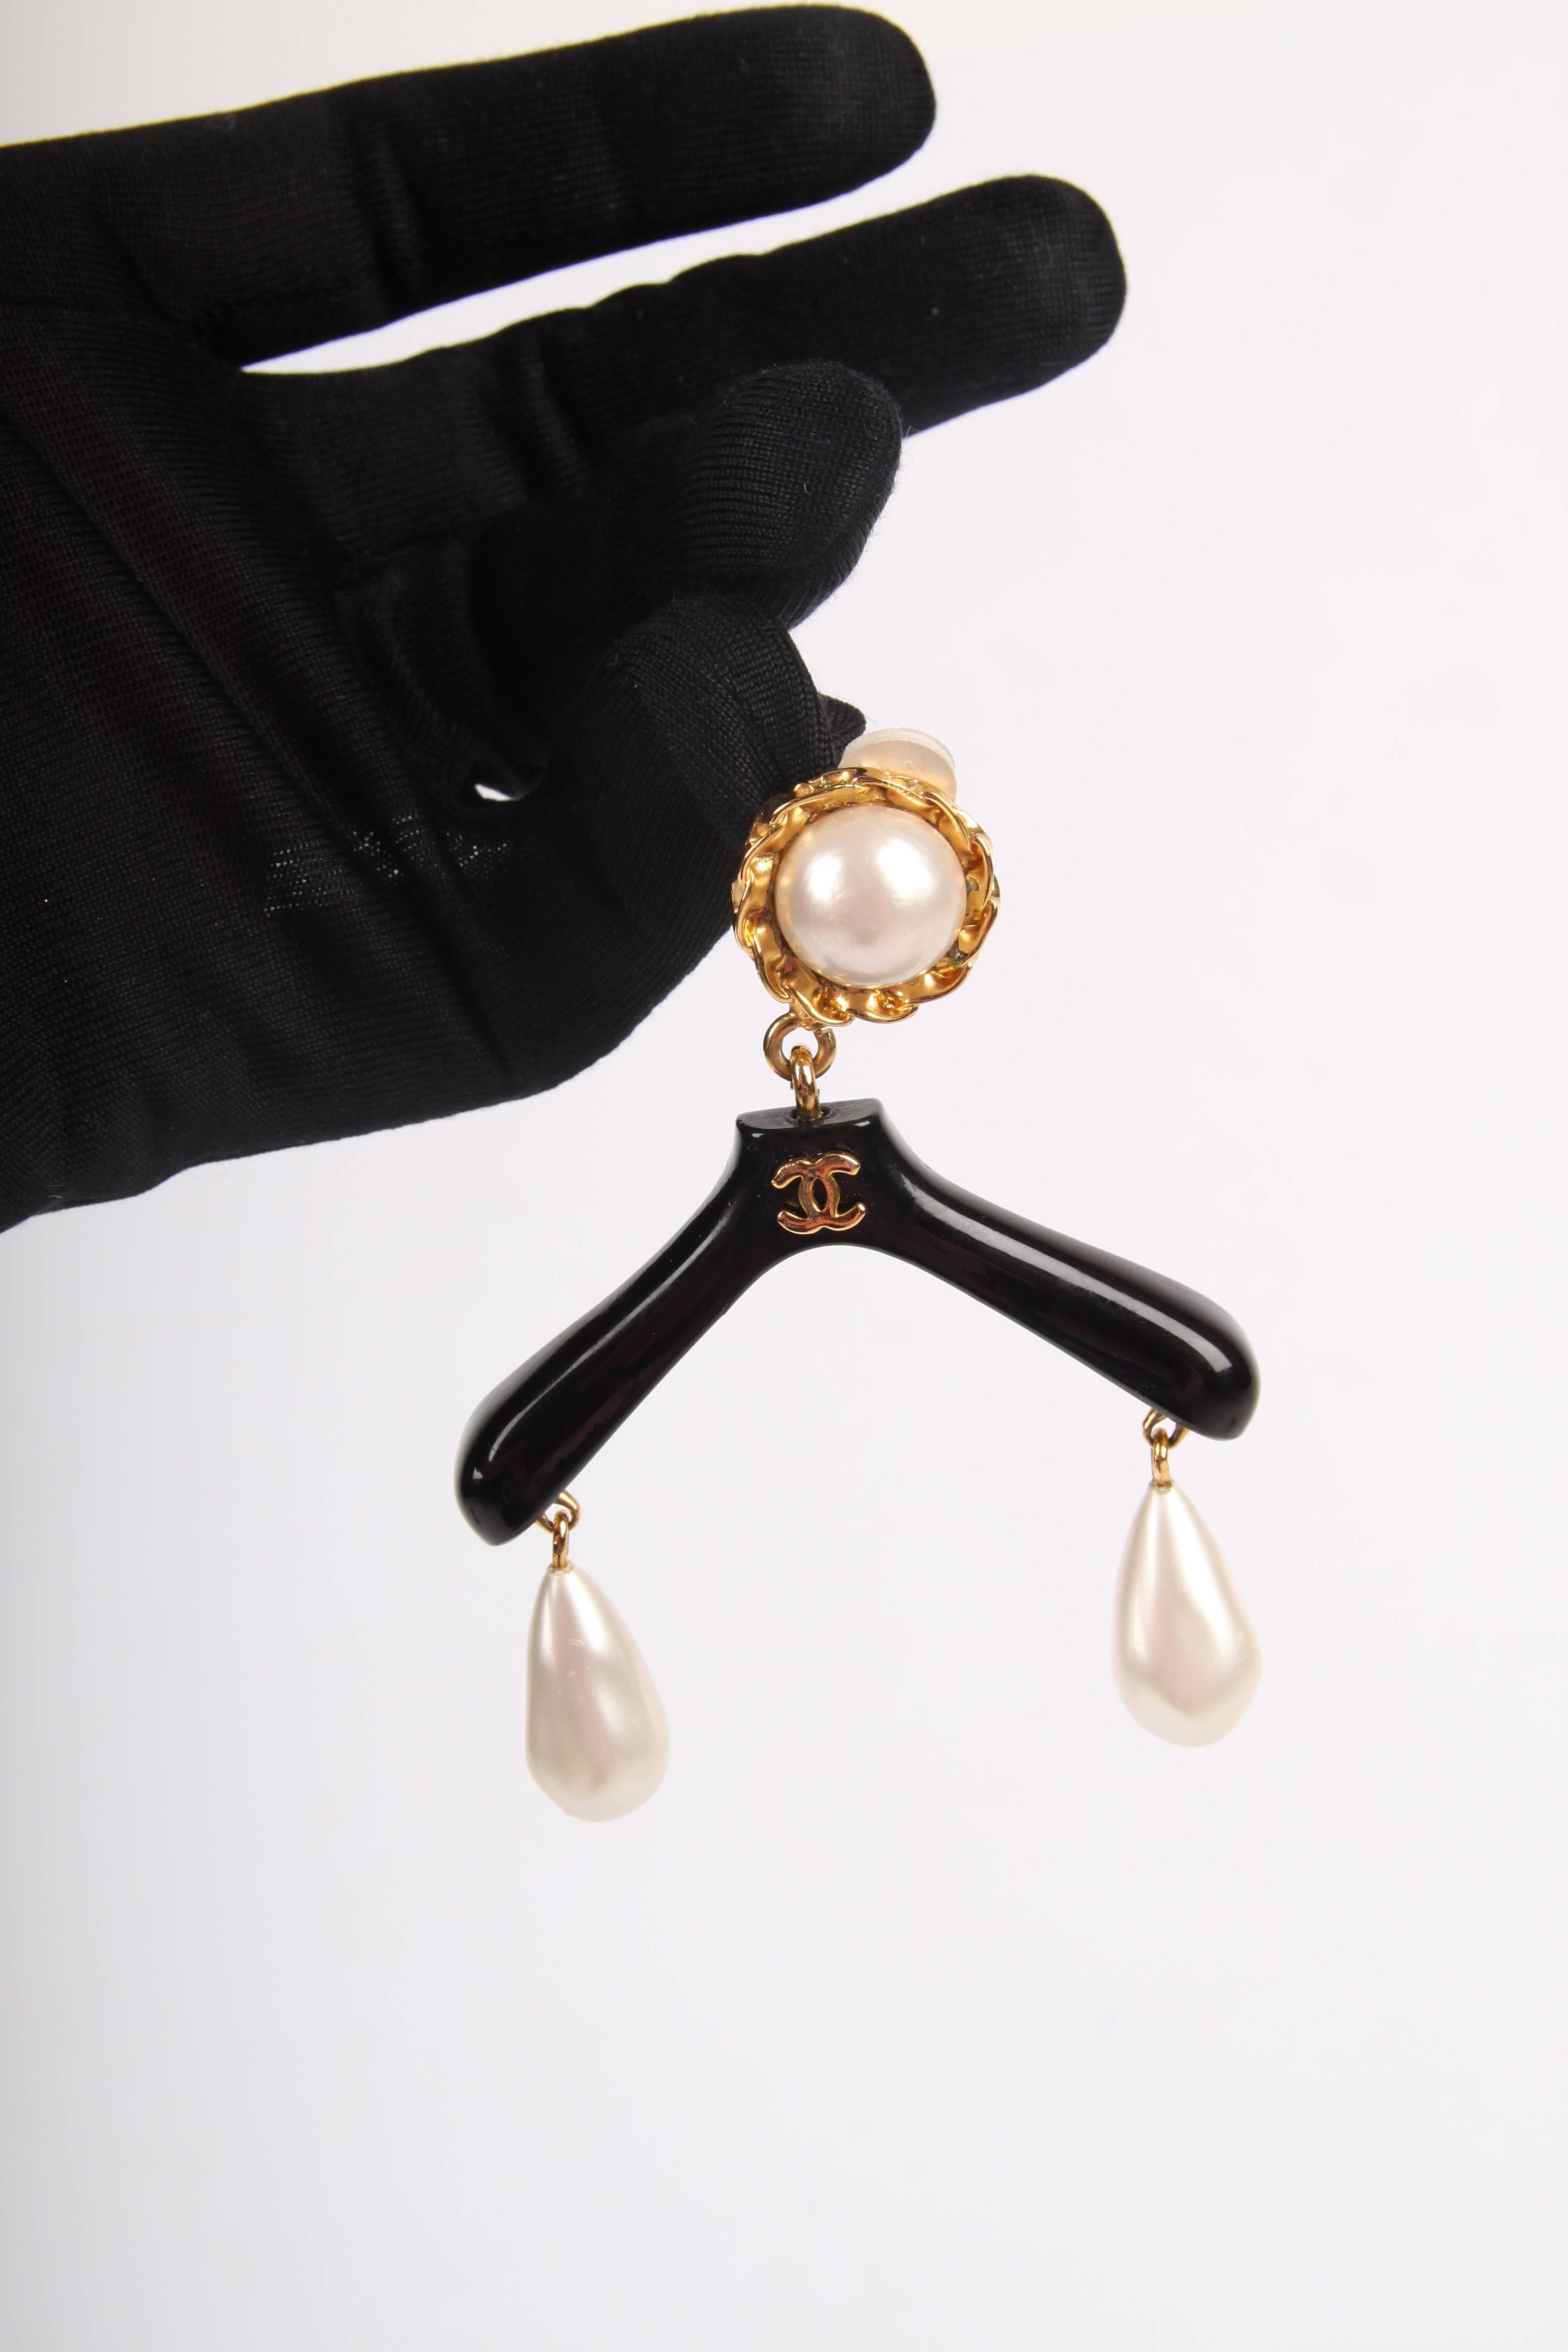 Very recognizable and super cool! Clip-on earring by Chanel in the shape of a coat hanger.

A large faux pearl on top with a gold-tone brim, you find the clip on the back. Underneath the black coat hanger with a golden CC logo in the center. On both